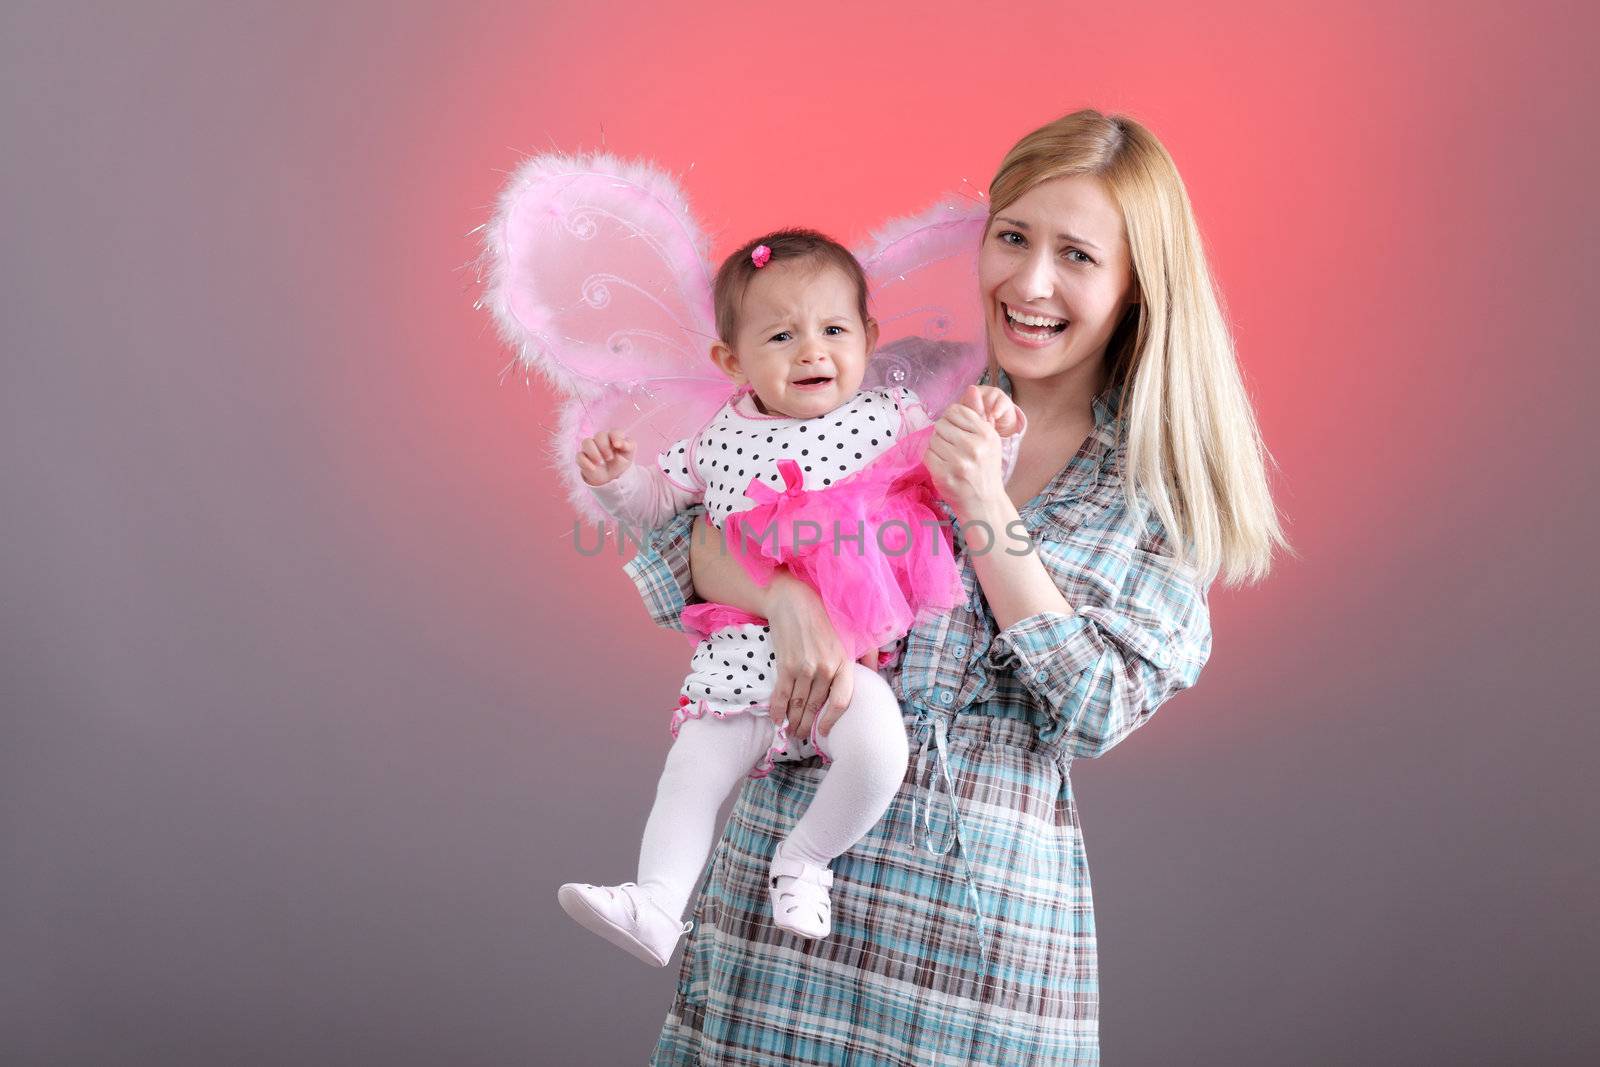 mother and daughter with funny expressions on pink background